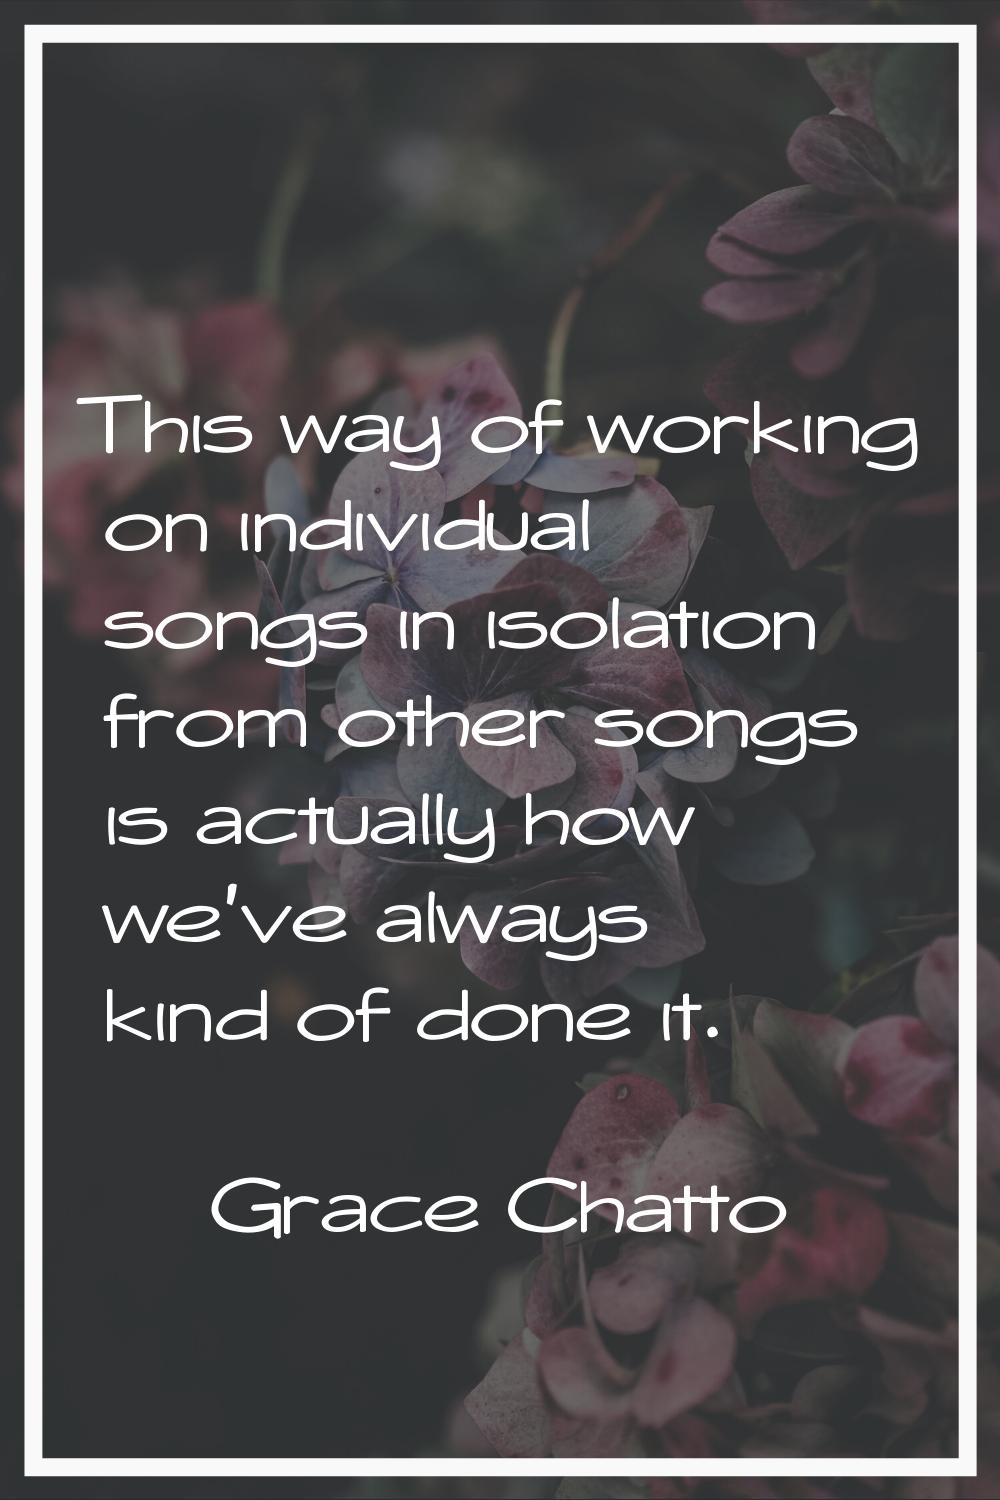 This way of working on individual songs in isolation from other songs is actually how we've always 